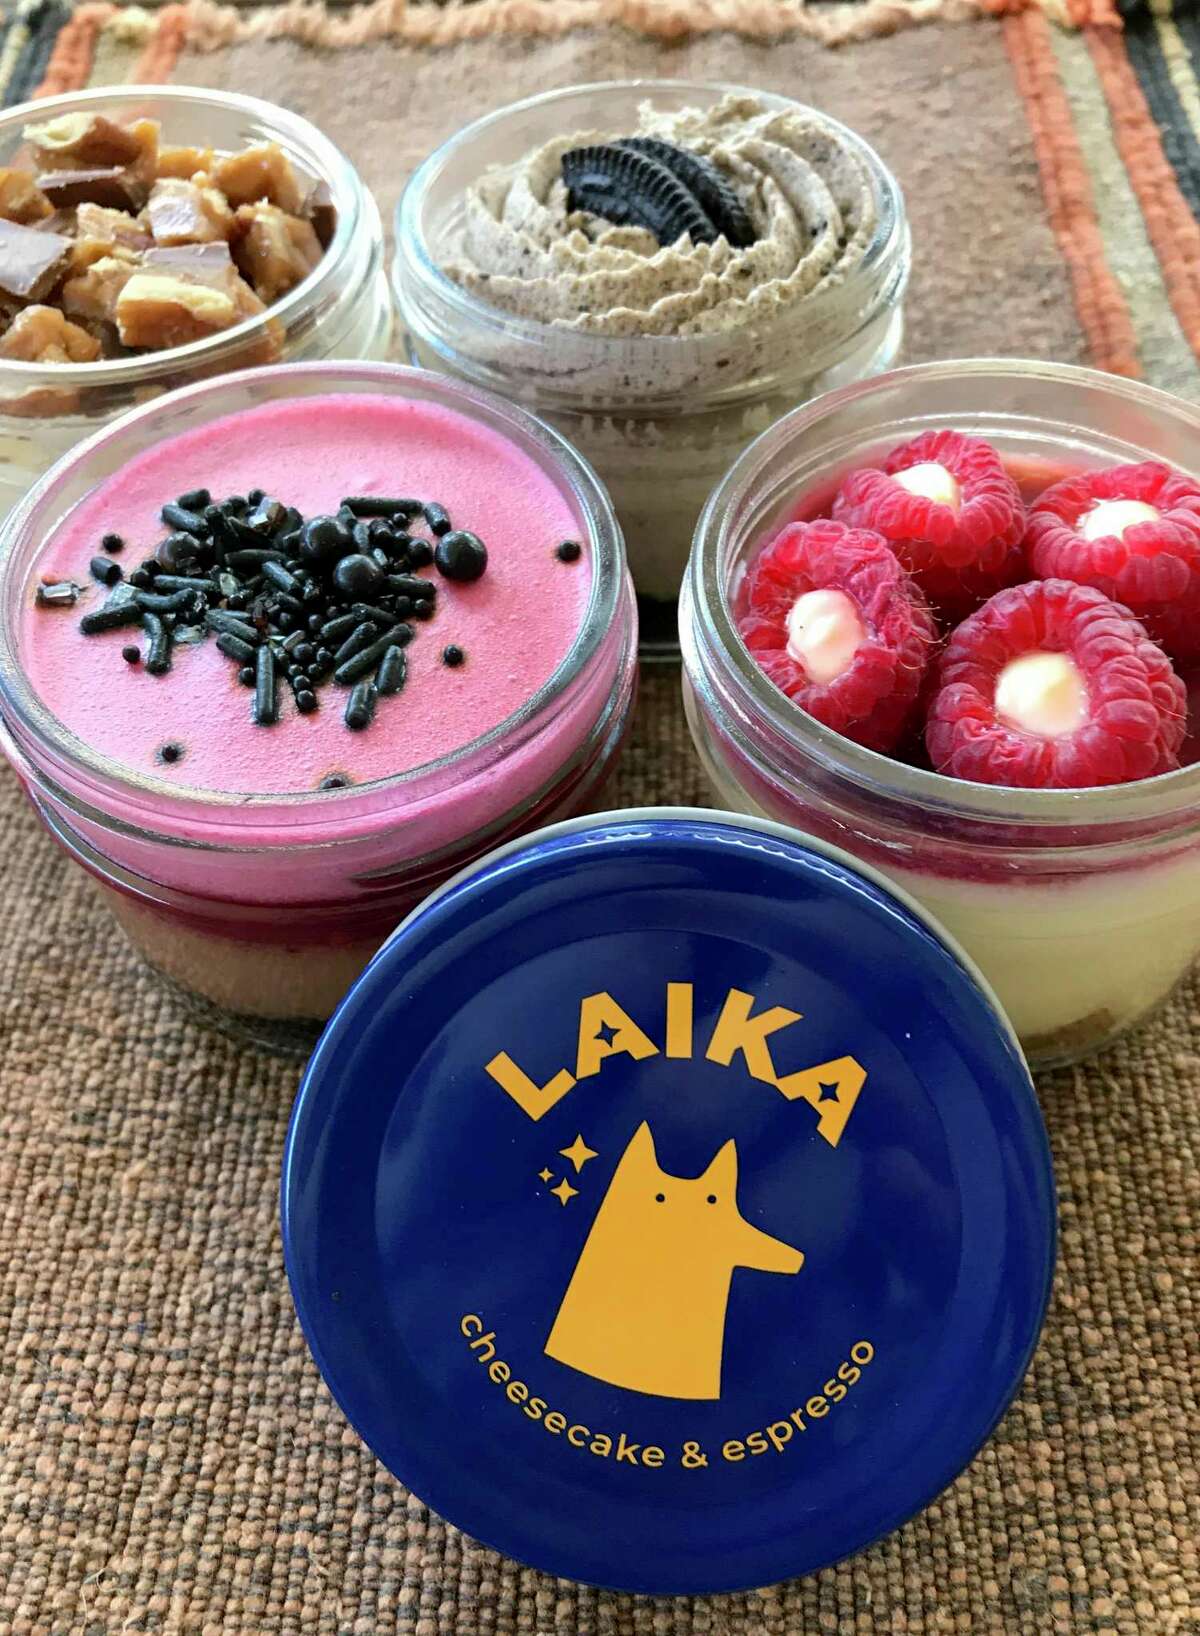 A selection of desserts from Laika Cheesecake & Espresso, clockwise from top left, Toffee Turtle, Oreo, Raspberry White Chocolate and Alice in Wonderland